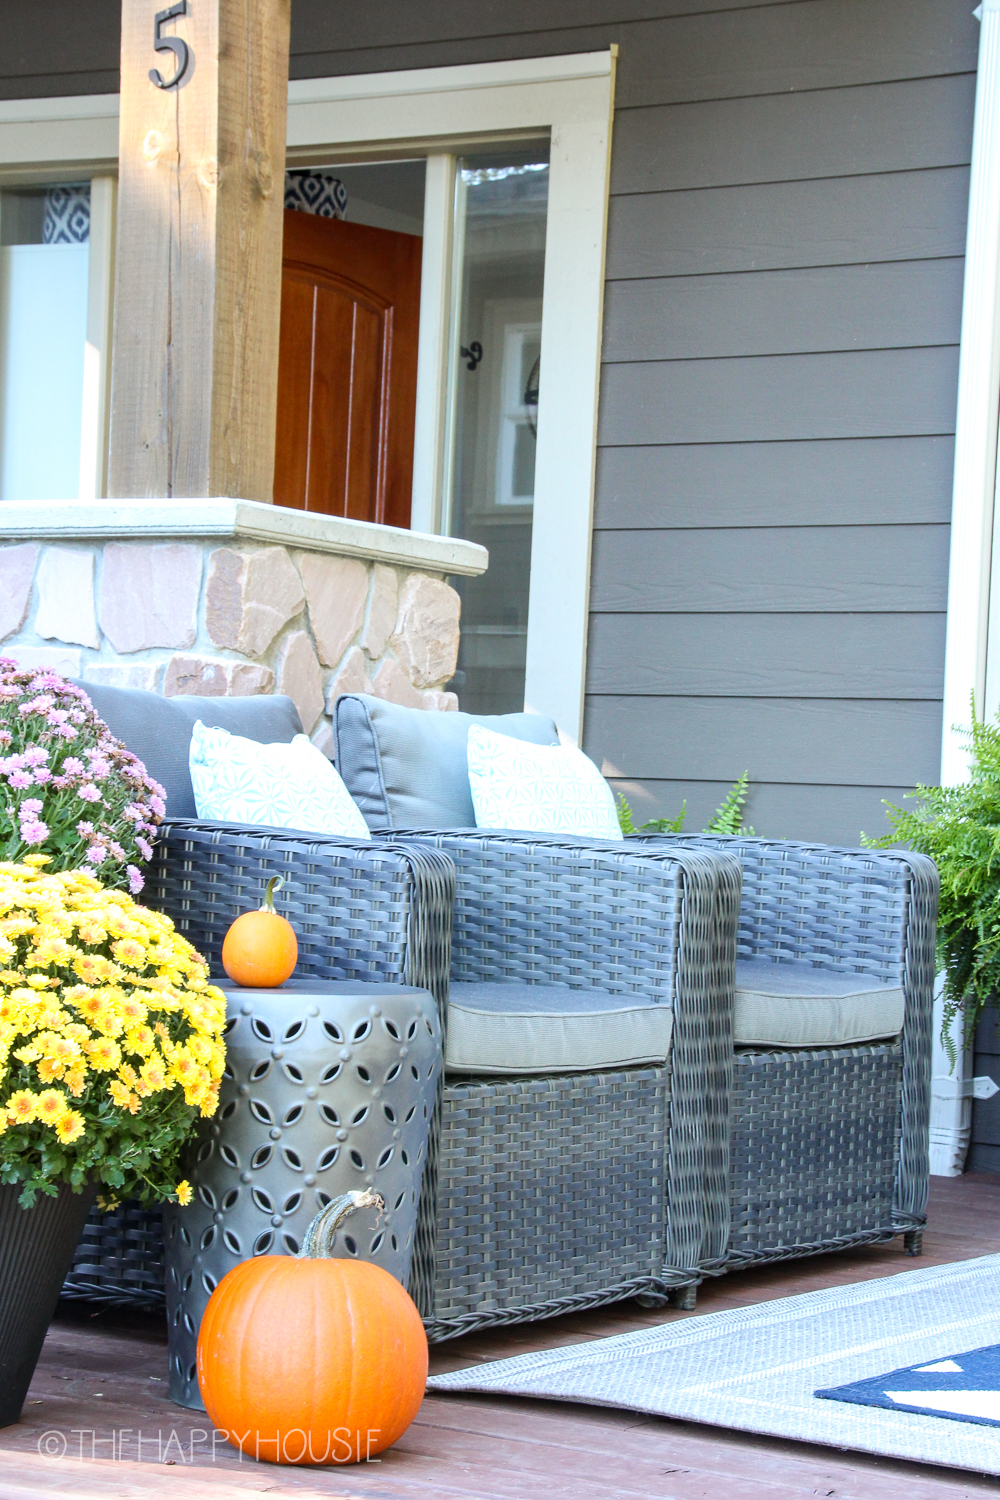 There are two outdoor wicker chairs with cushions on the deck.